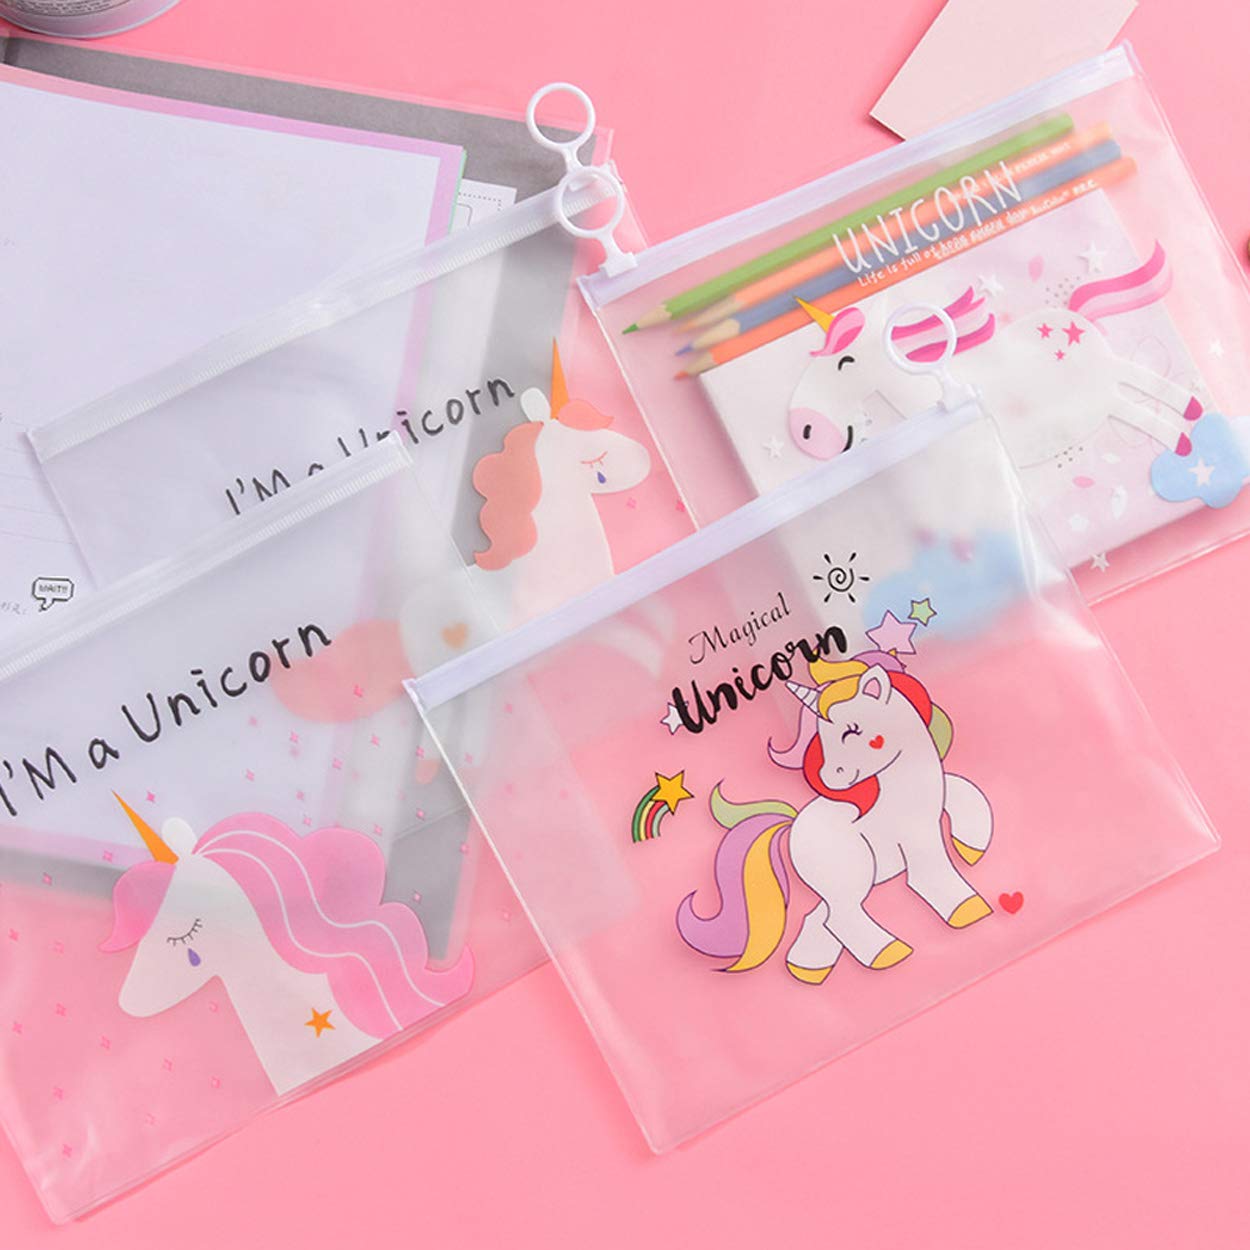 Paradise Soft Toys Pencil pouch (Buy 1 get 1 free) "Unicorn-Themed A5 Size Transparent Silicone Pouch - Perfect for School or Office Supplies